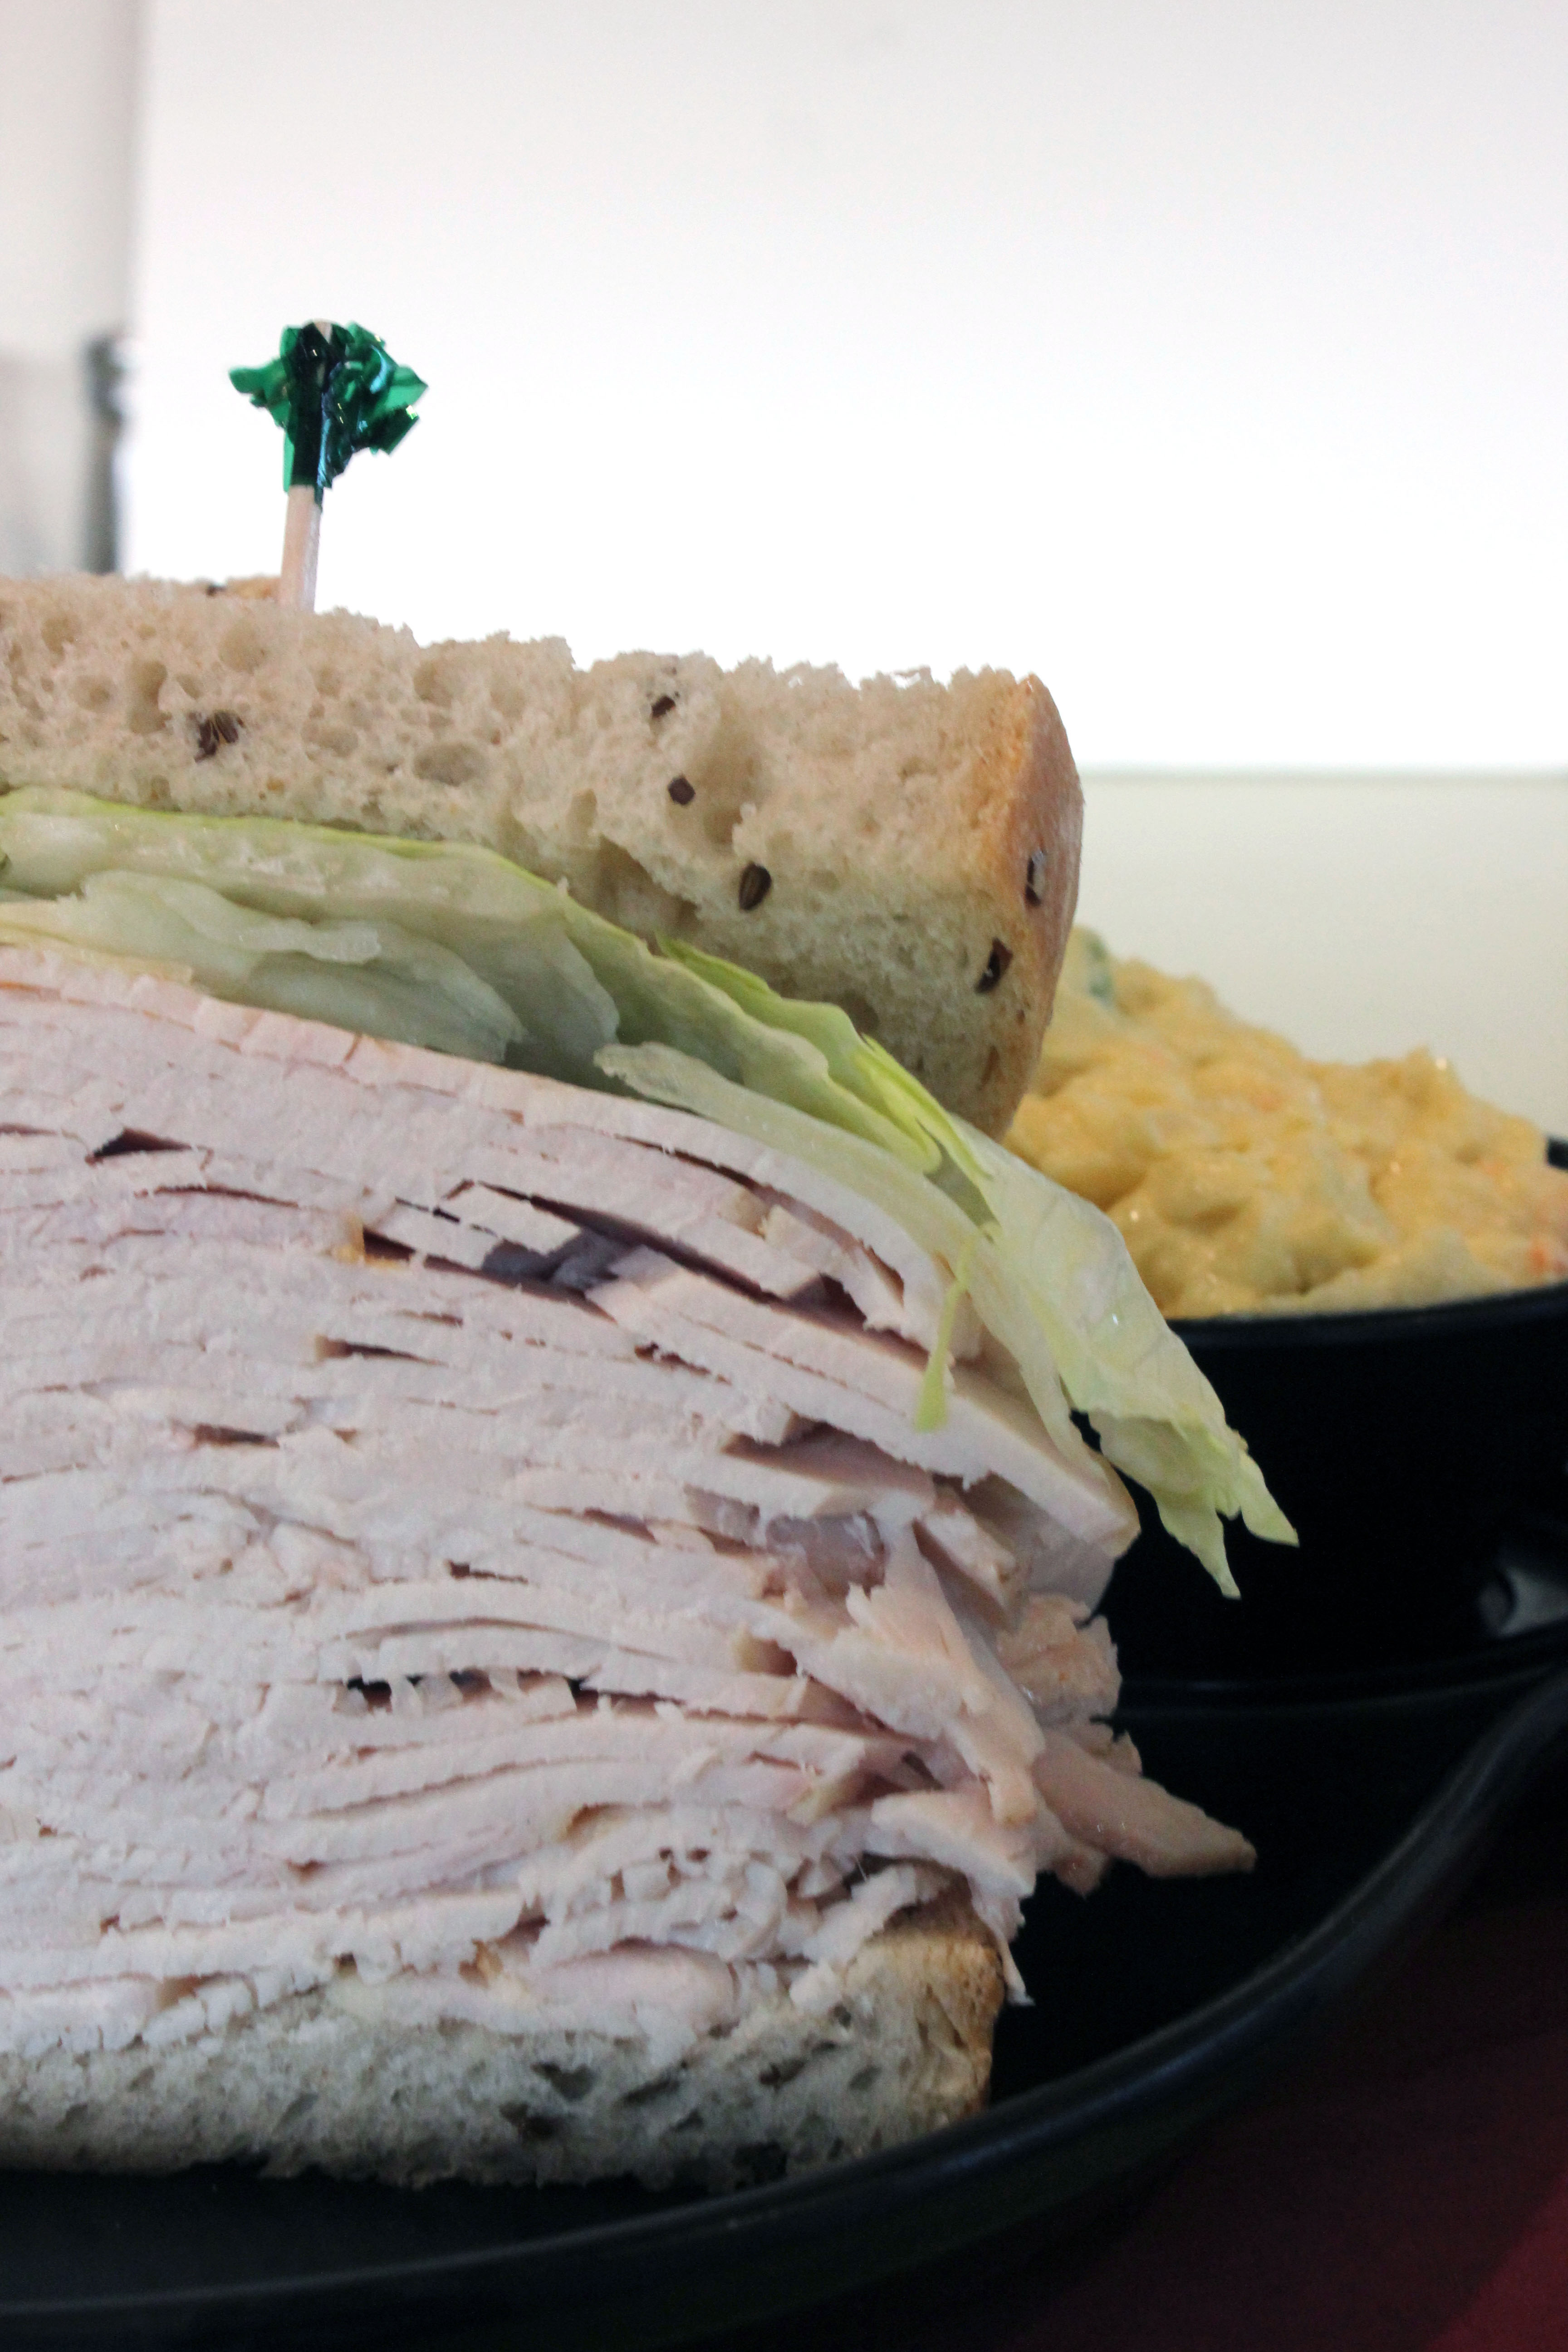 A jumbo turkey sandwich, with a side order of potato salad, from Jack’s Deli.